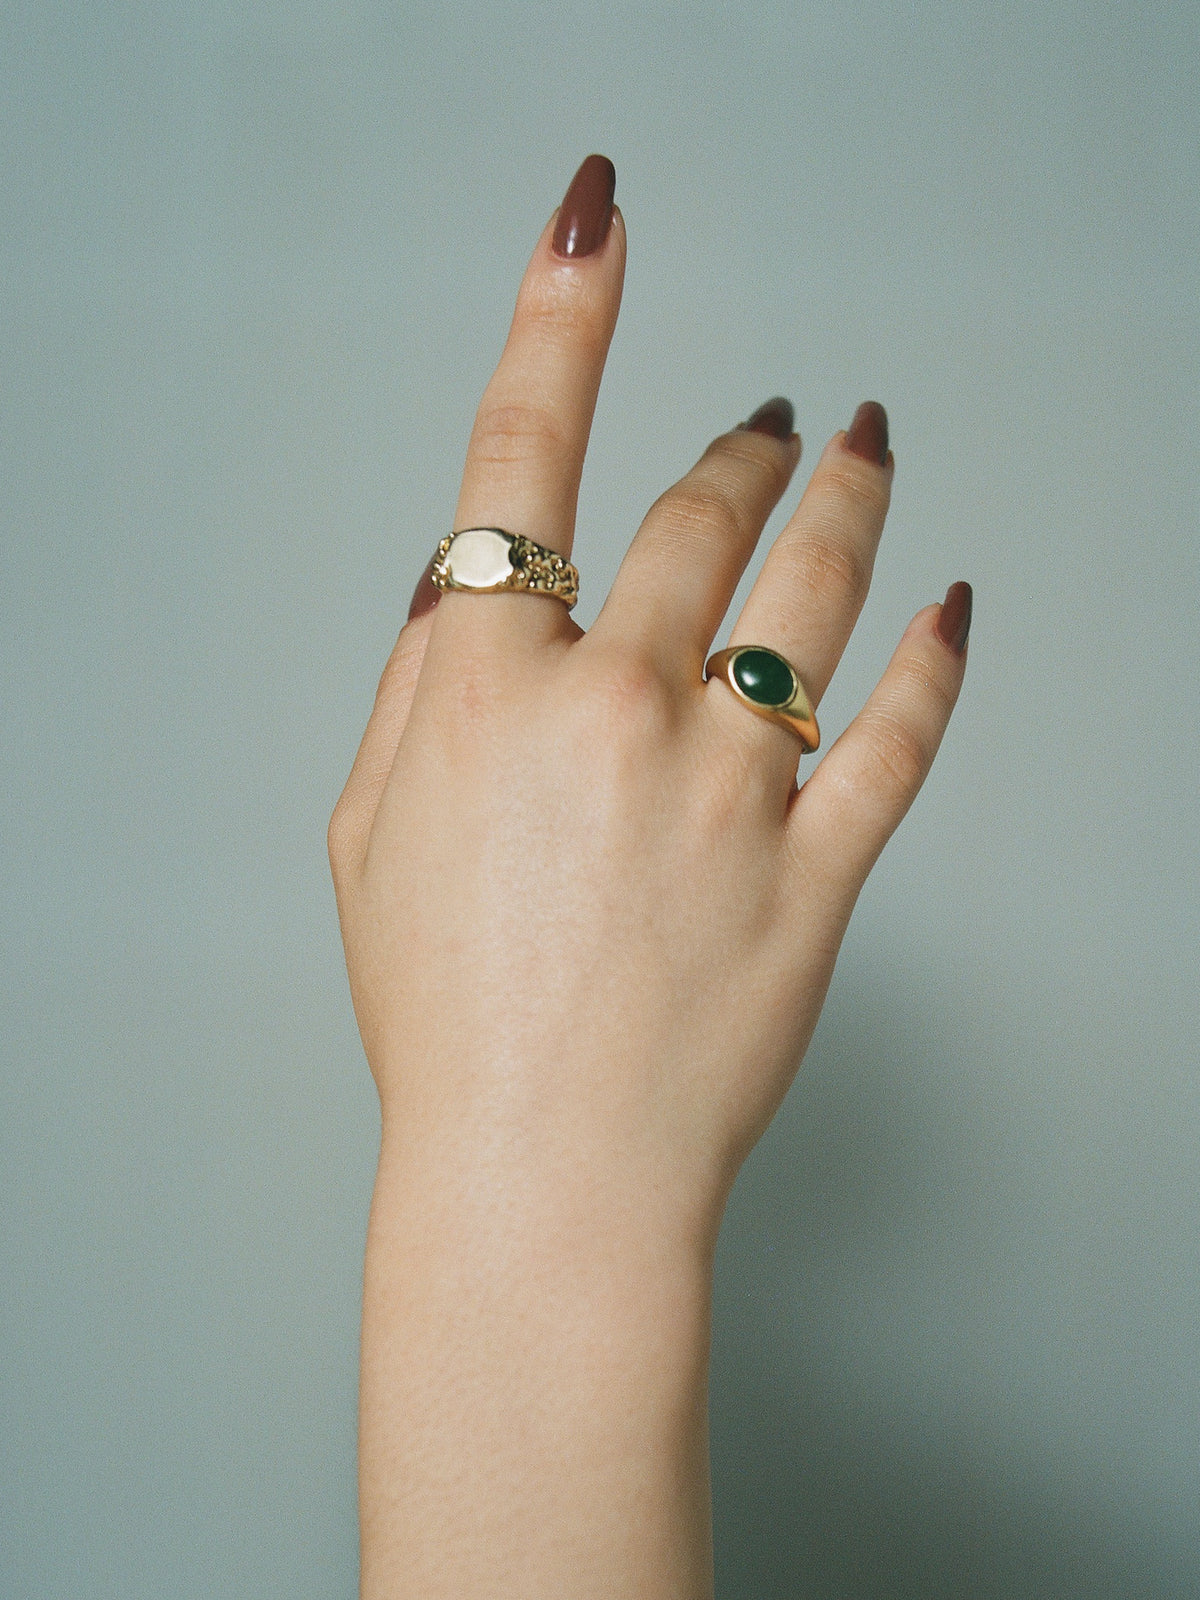 FARIS EYE Ring in 14k gold plate and jade cabochon styled with FARIS ROCA Signet Small in gold plate on female model